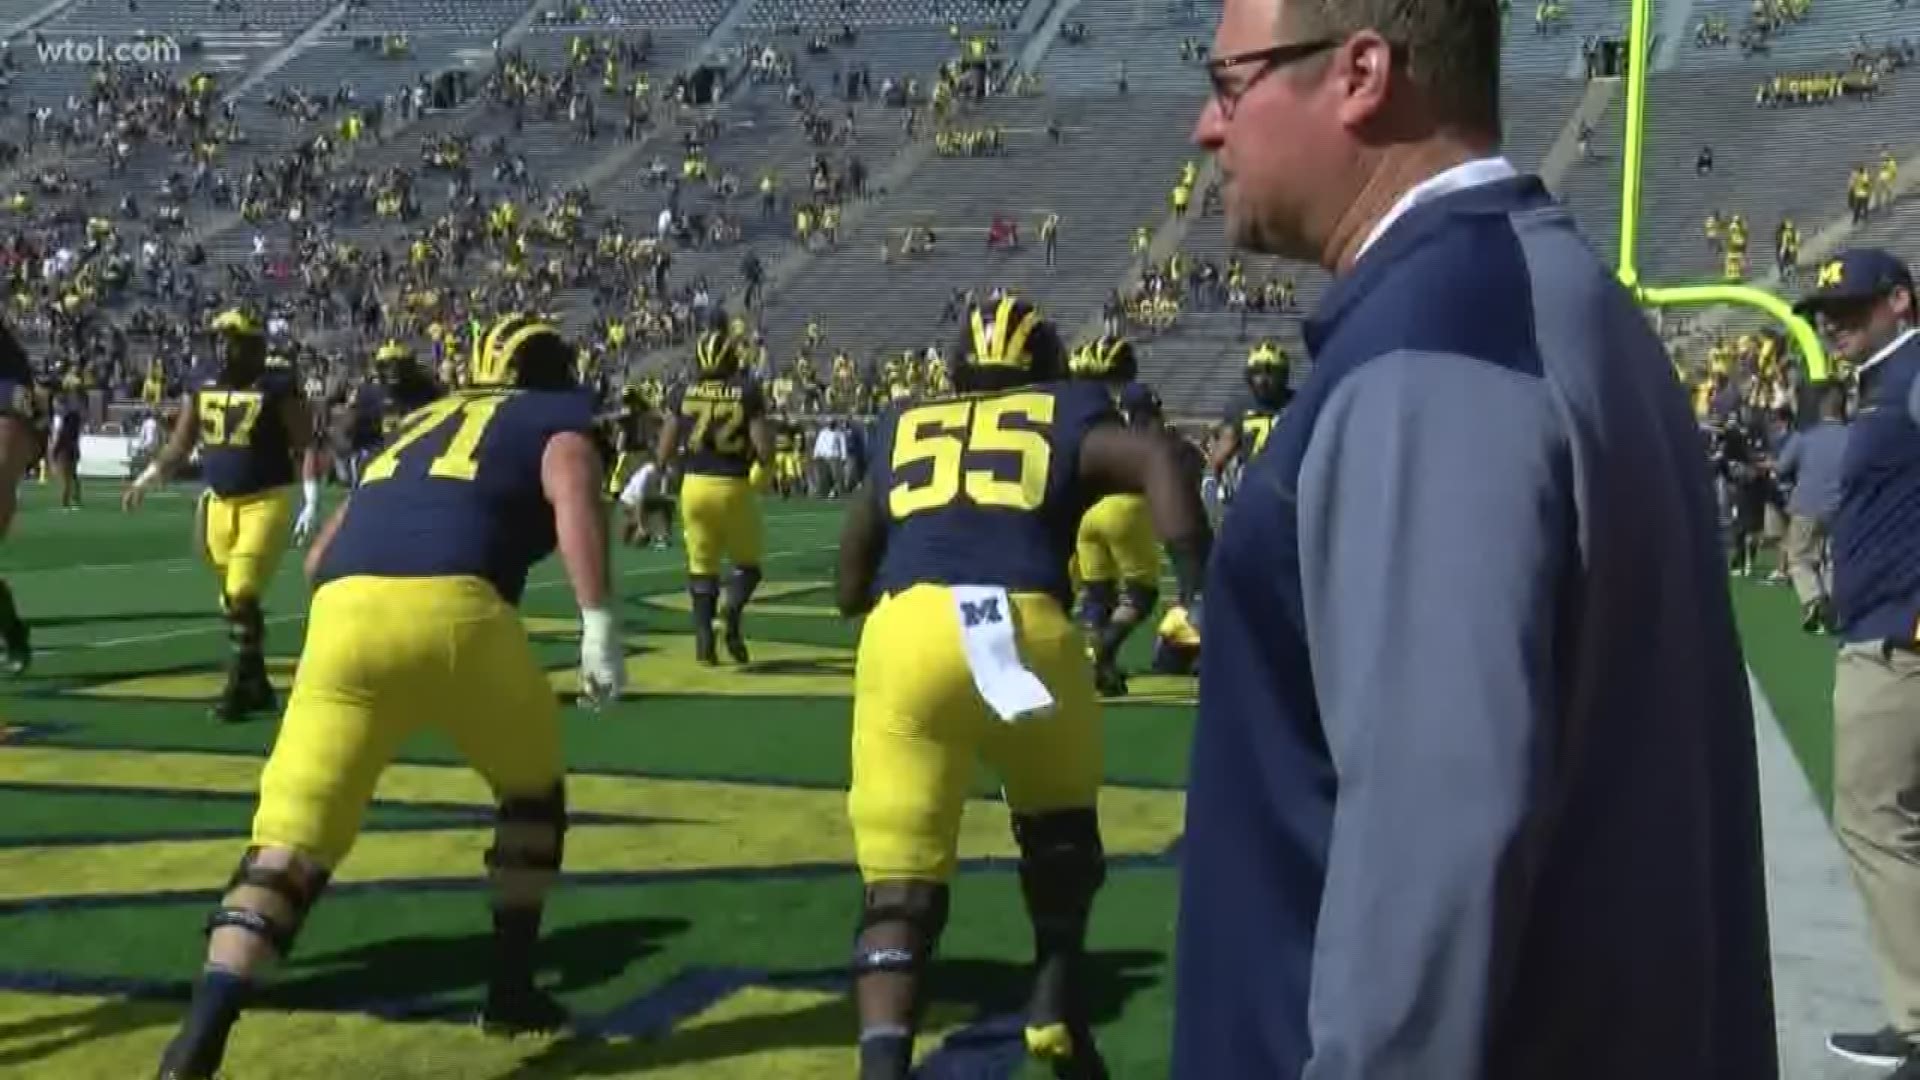 Former Wolverine James Hudson's family is upset by Harbaugh's comments